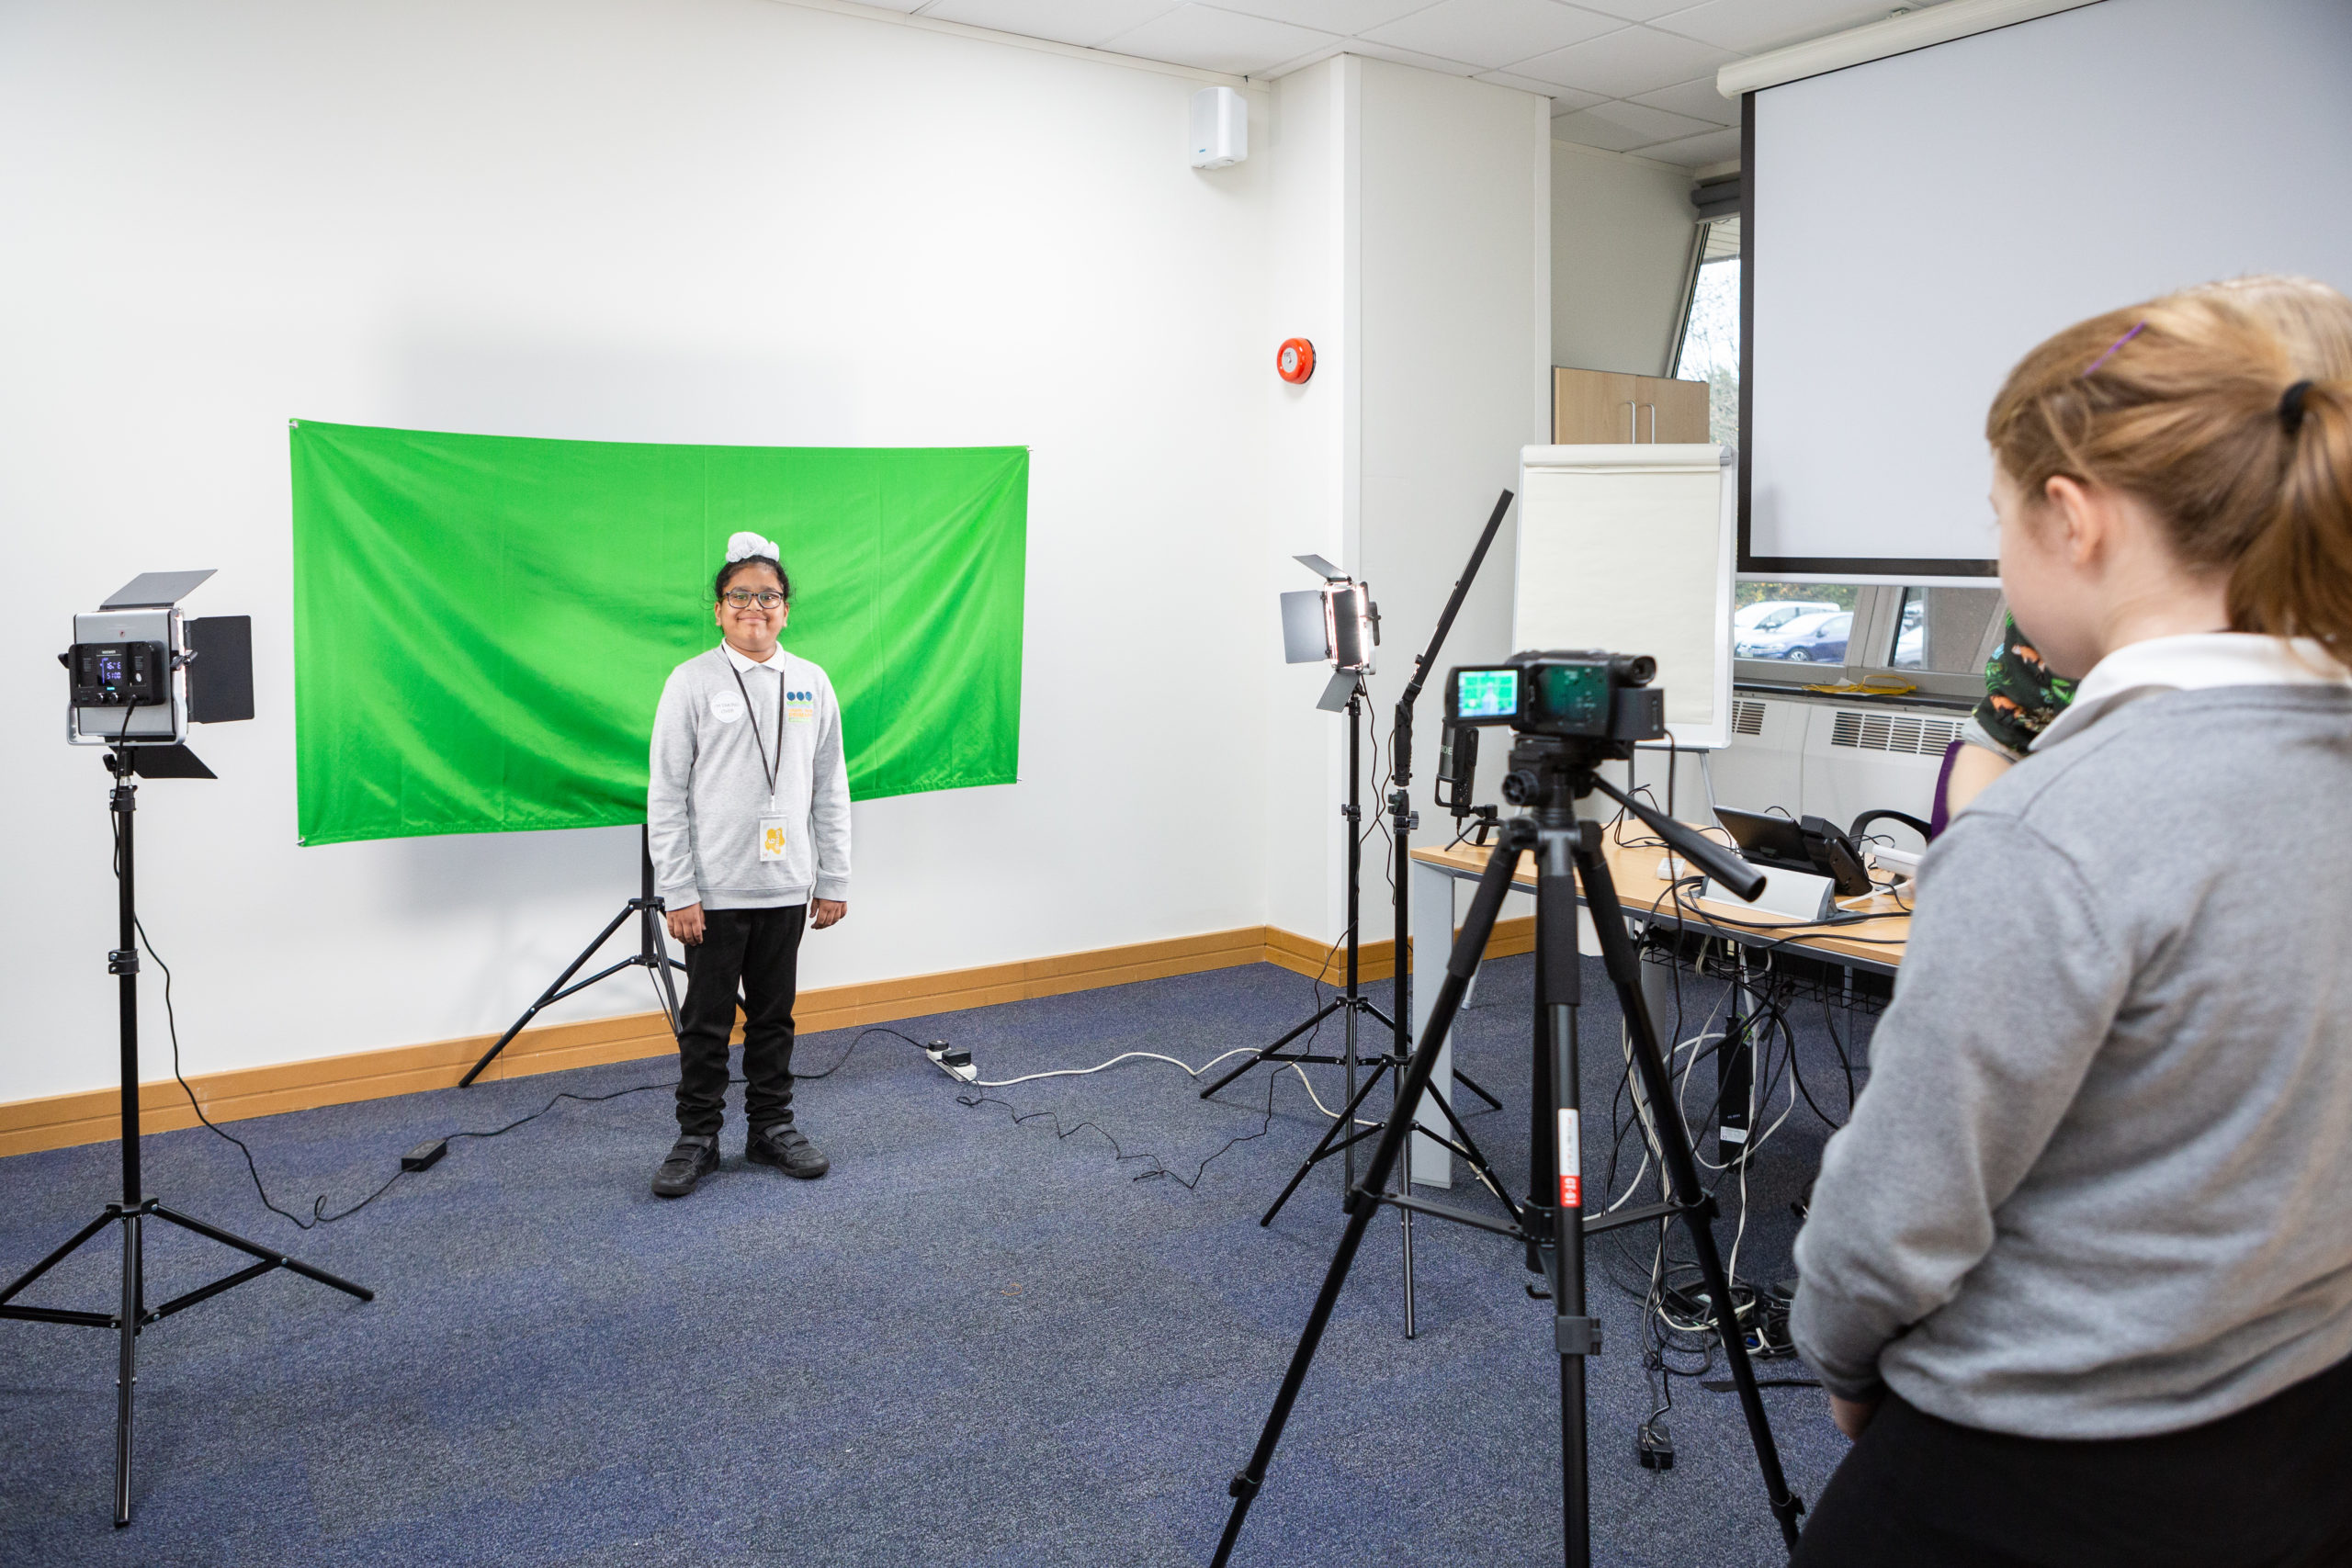 A young girl stands grinning in front of a green screen with camera pointed towards her at the National archives.